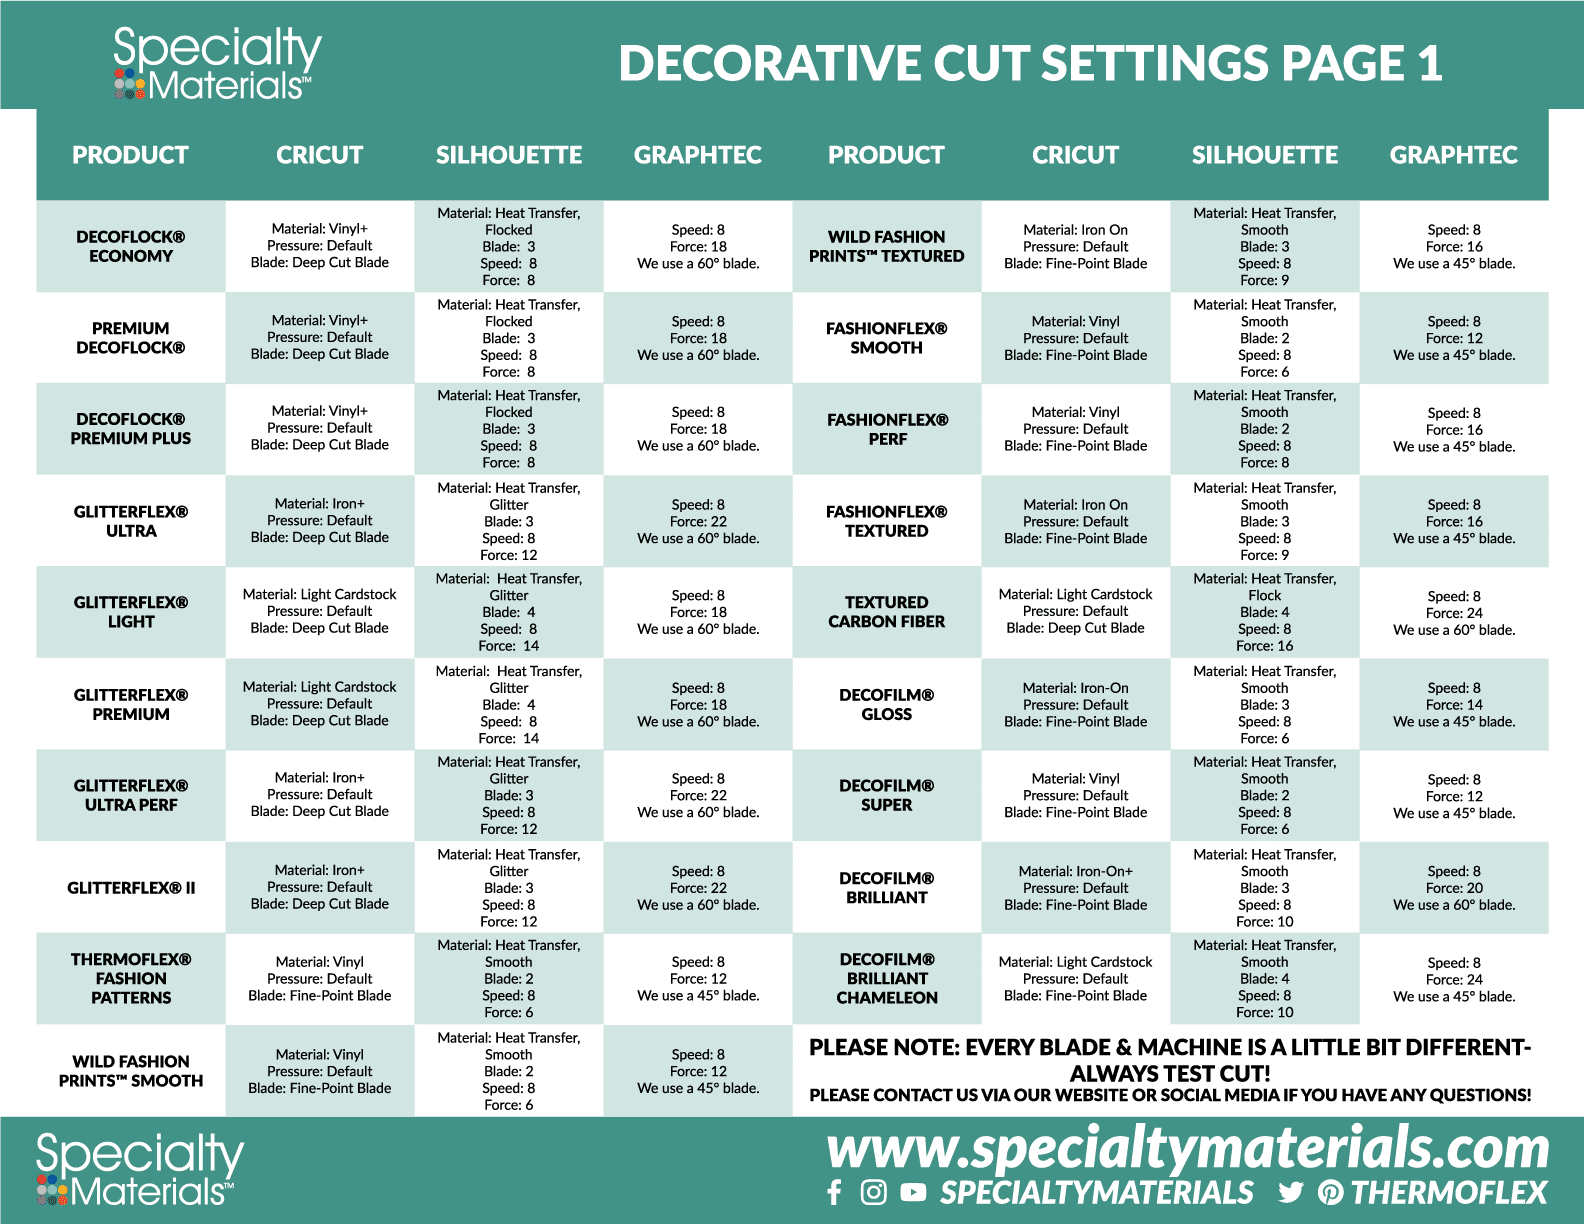 An infographic image detailing cut settings for decorative materials. This is page 1.